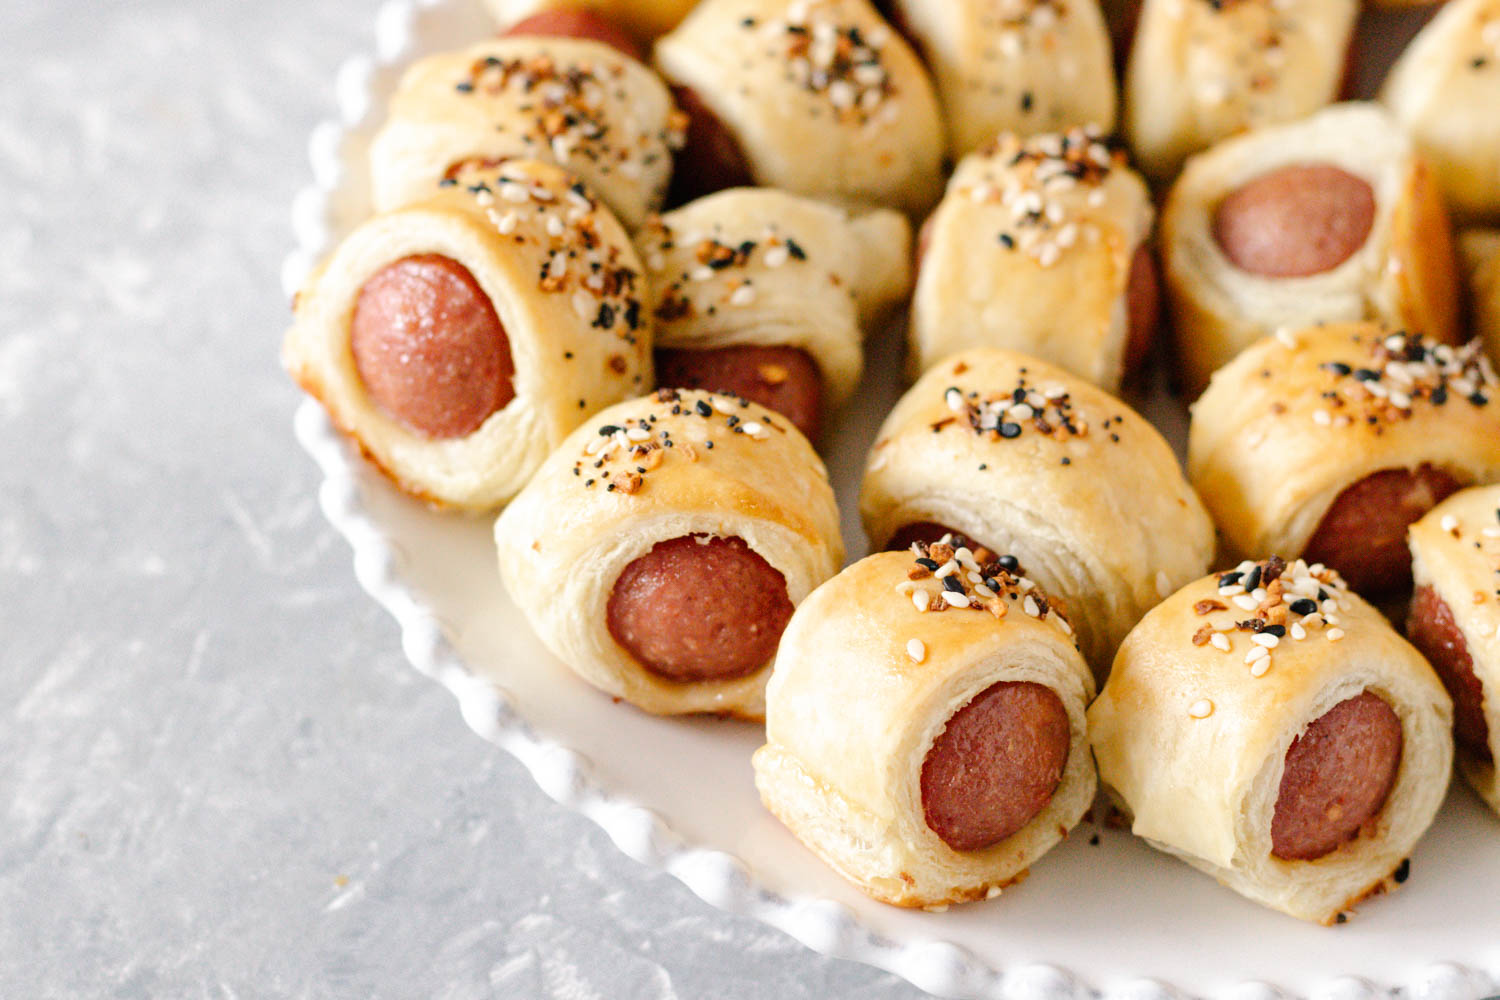 horizontal image of the prepared puff pastry hot dog bites on a plate. Taken at about a 45 degree angle and a little closer to show texture.